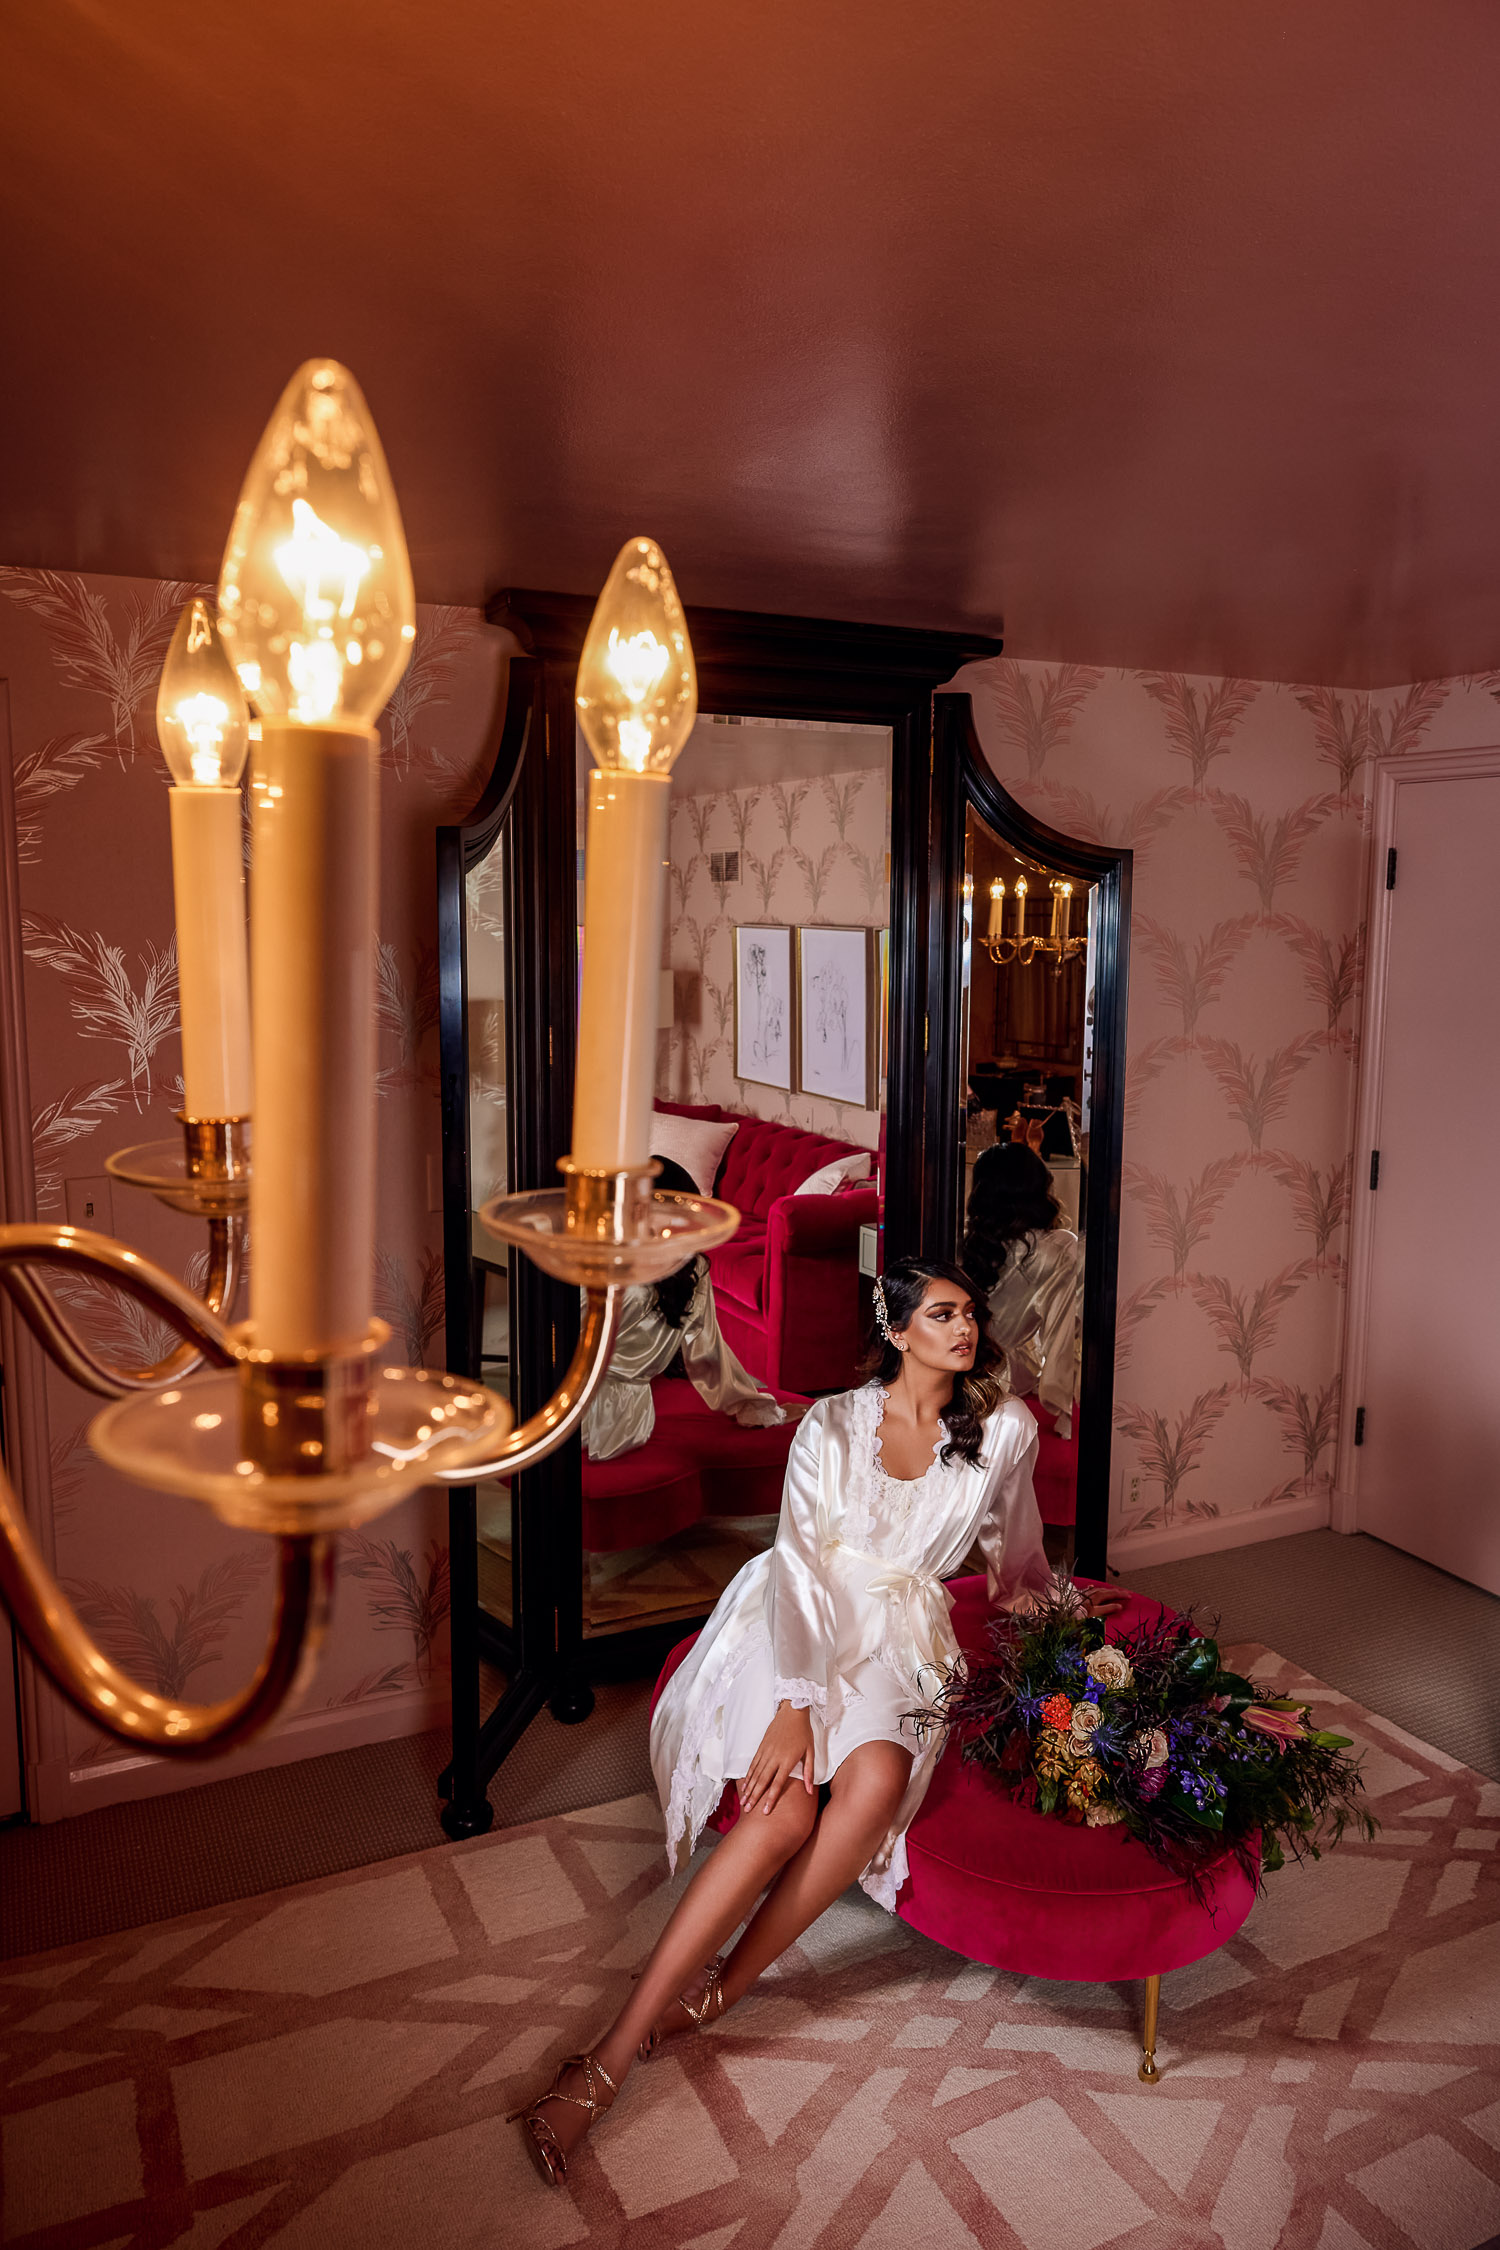 Bride wearing silk robe lounges in front of mirror and chandelier in pink room.